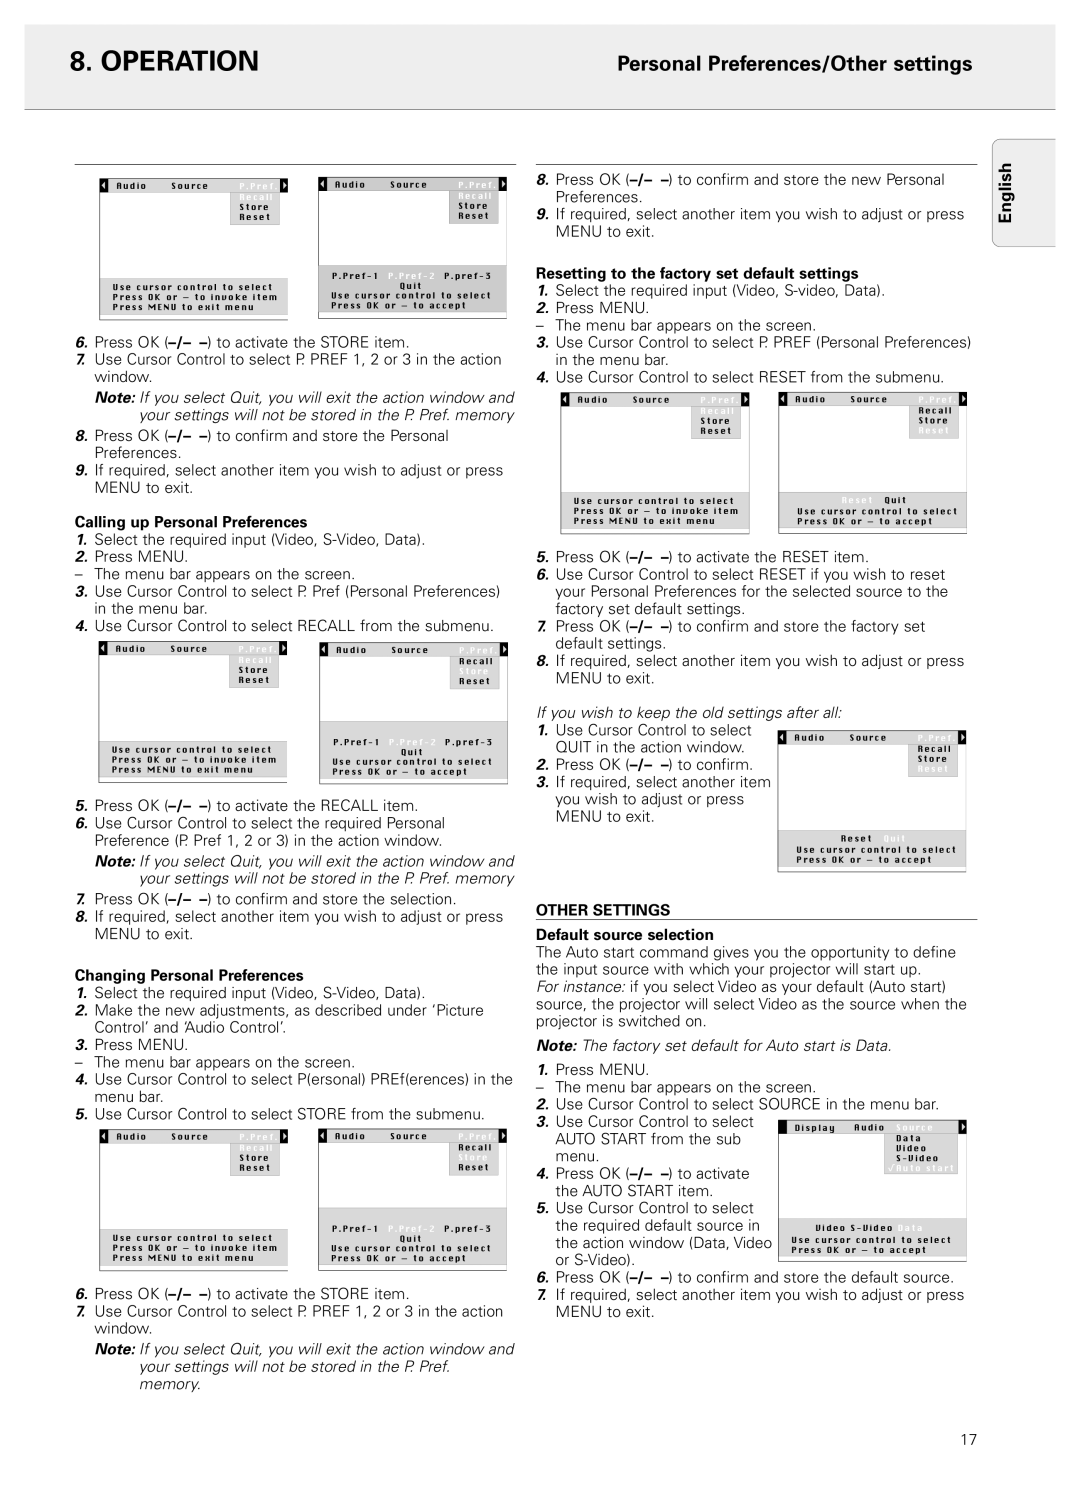 Philips 20 series, LC4043 manual Personal Preferences/Other settings, Operation, English, Calling up Personal Preferences 